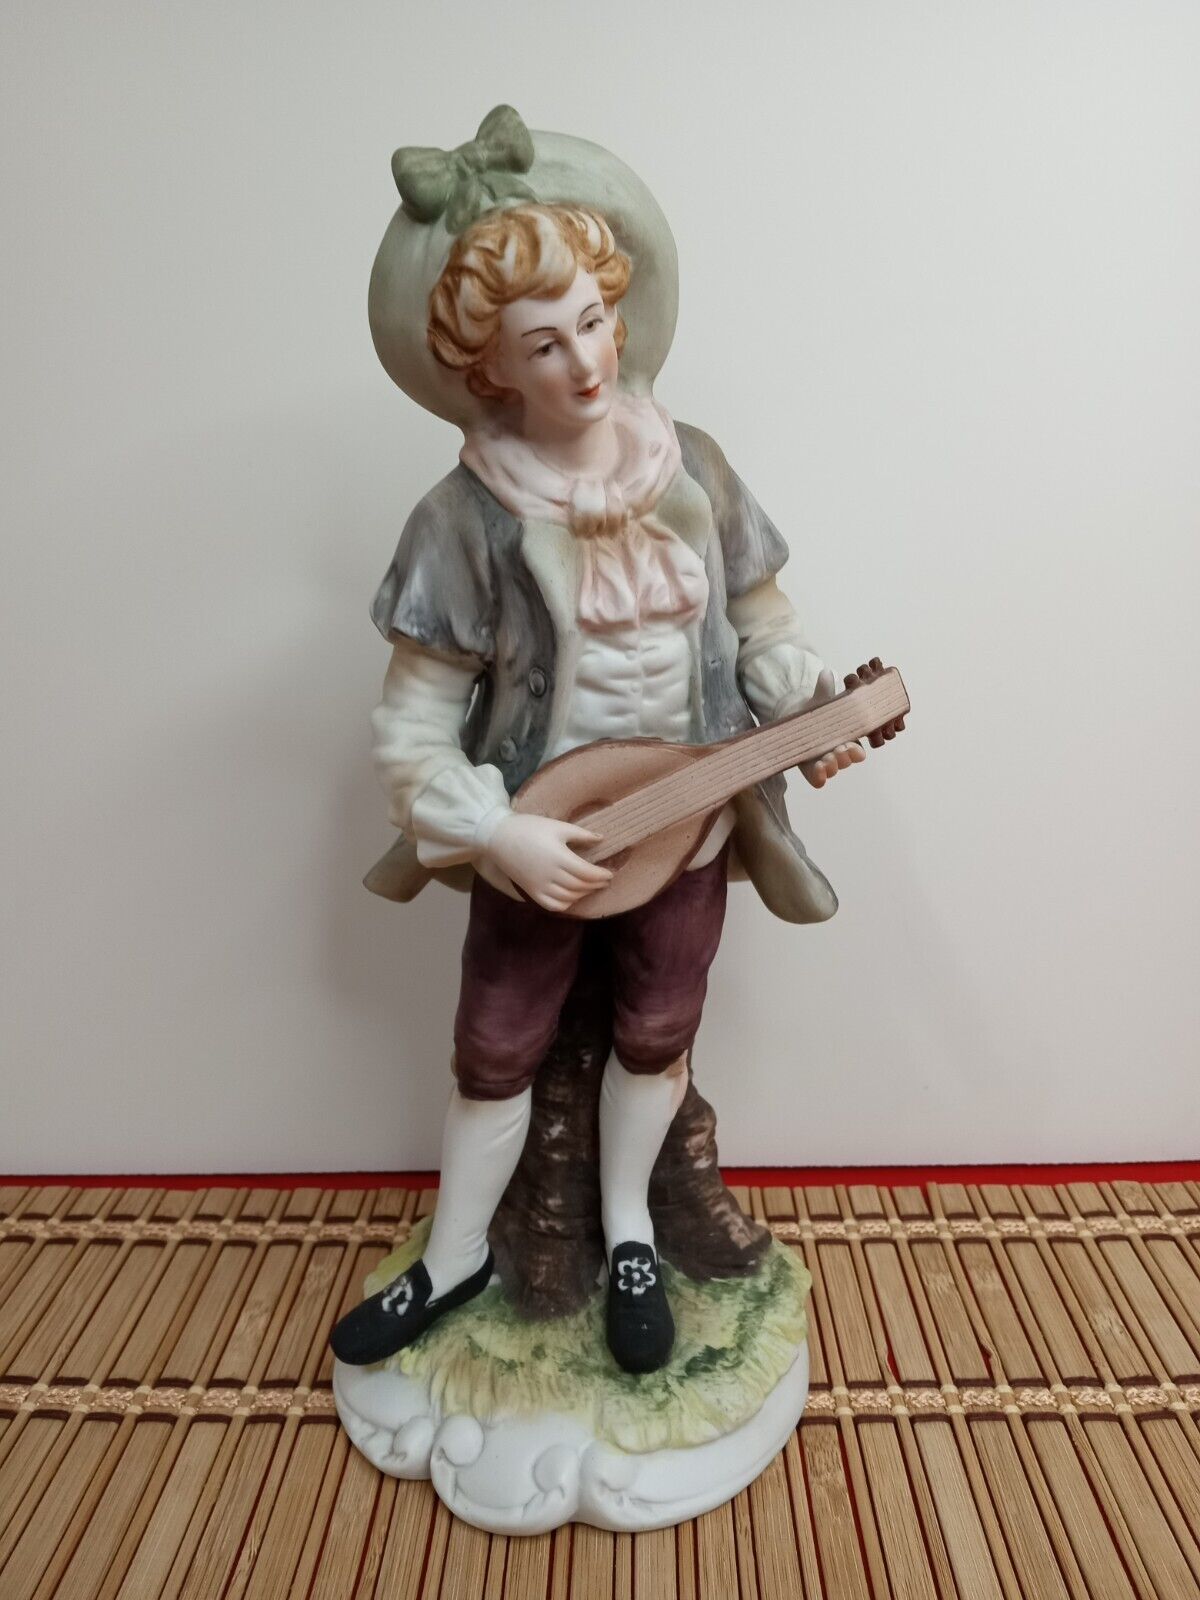 Figurine Boy With Lute / Guitar Hand Painted KW365 Vintage Lefton China